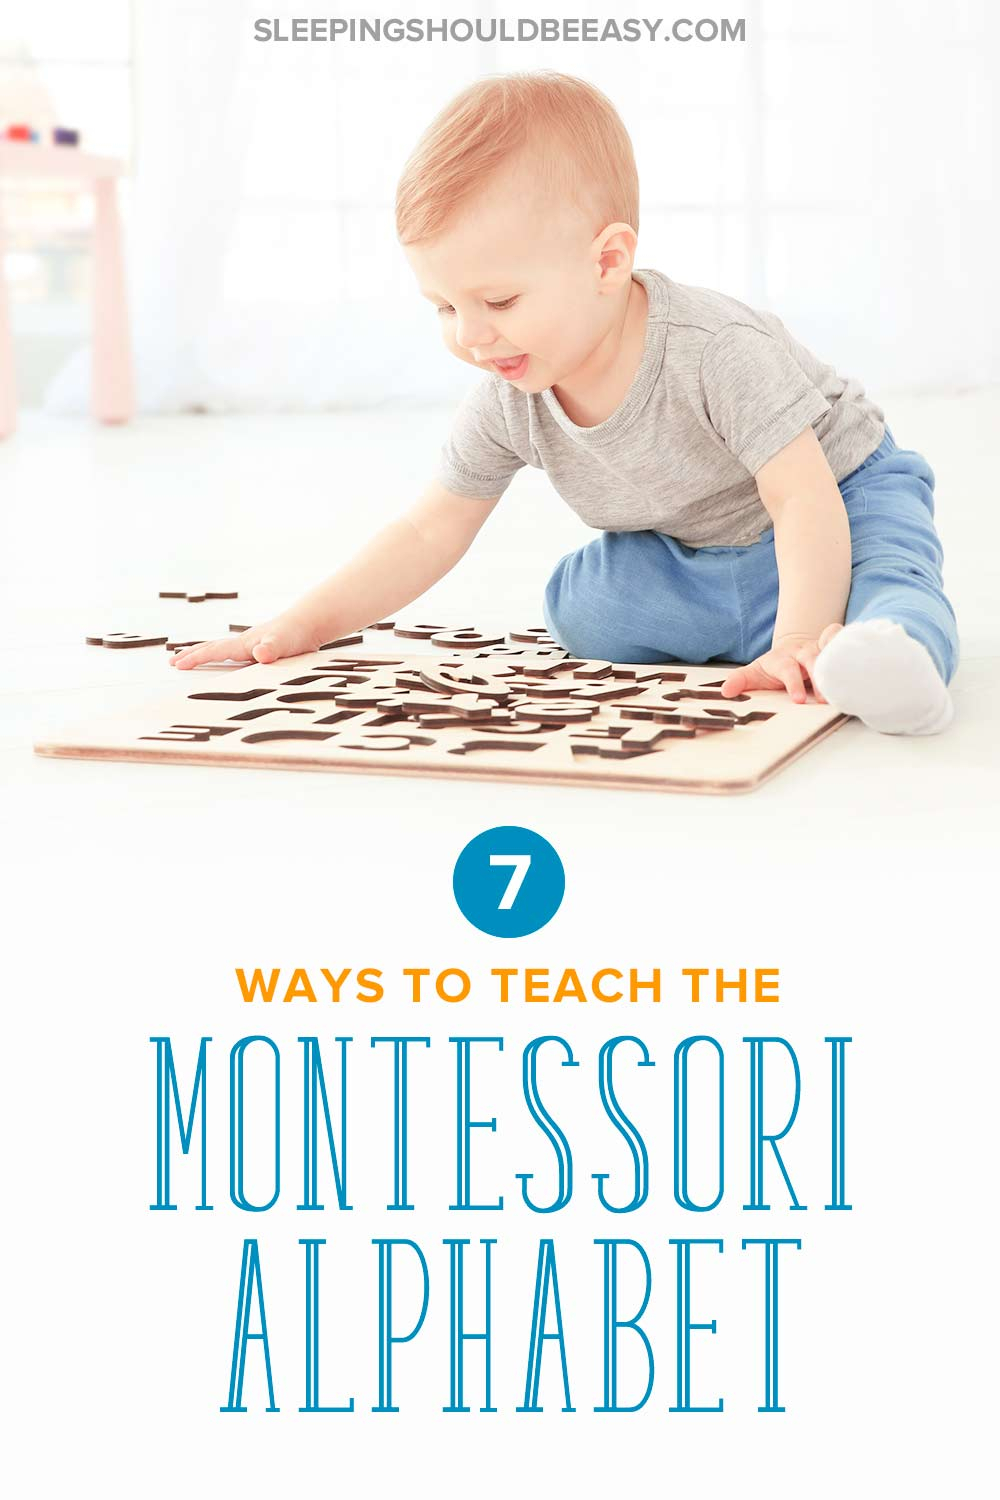 Teaching The Montessori Alphabet | Sleeping Should Be Easy throughout How To Teach Tracing Letters